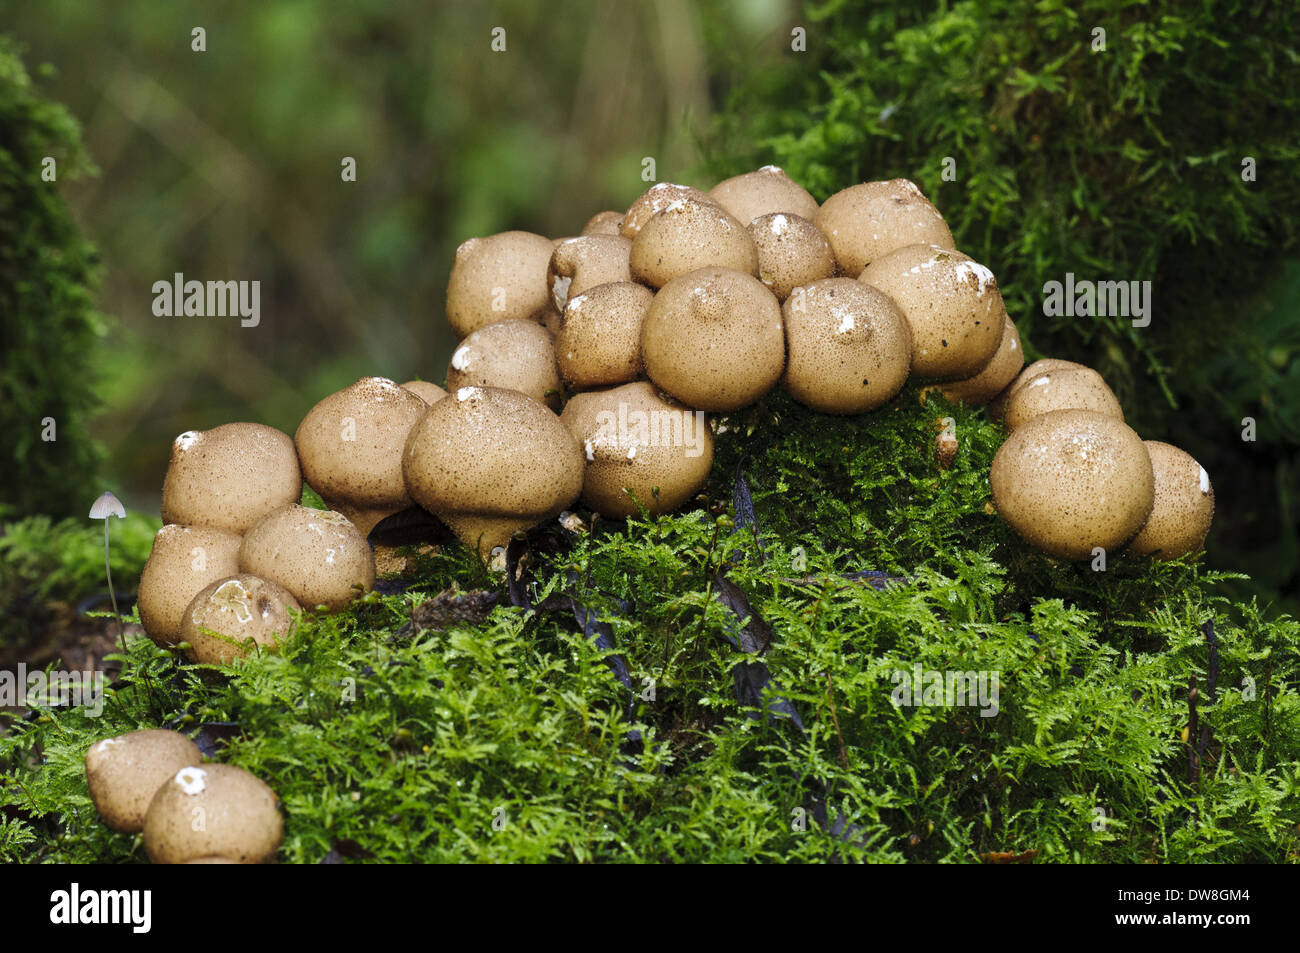 Stump Puffball (Lycoperdon pyriforme) fruiting bodies group growing on moss covered tree stump Potteric Carr Nature Reserve Stock Photo